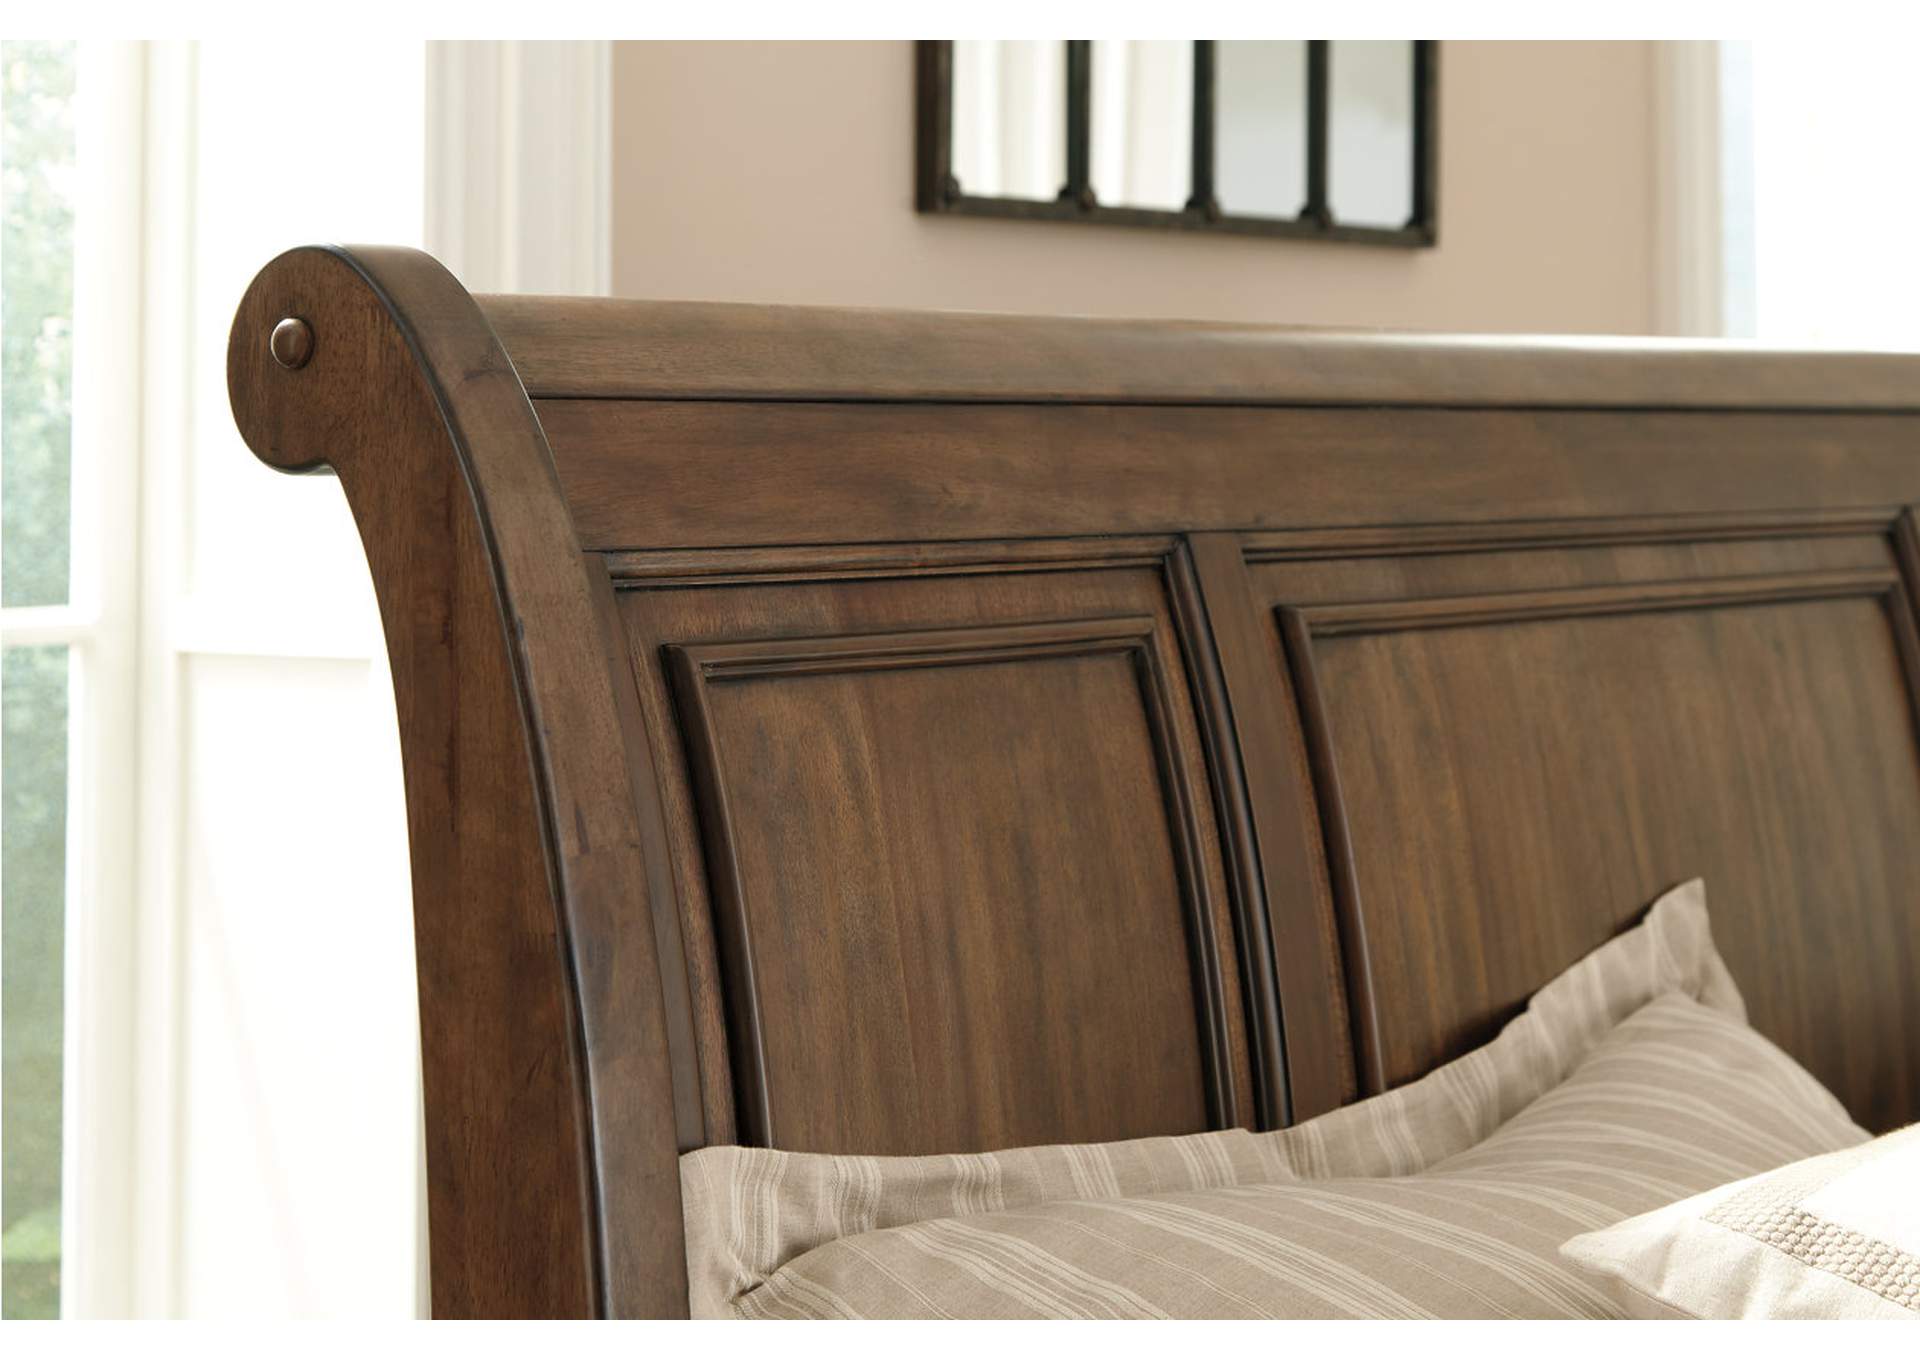 Flynnter California King Sleigh Bed with 2 Storage Drawers,Signature Design By Ashley